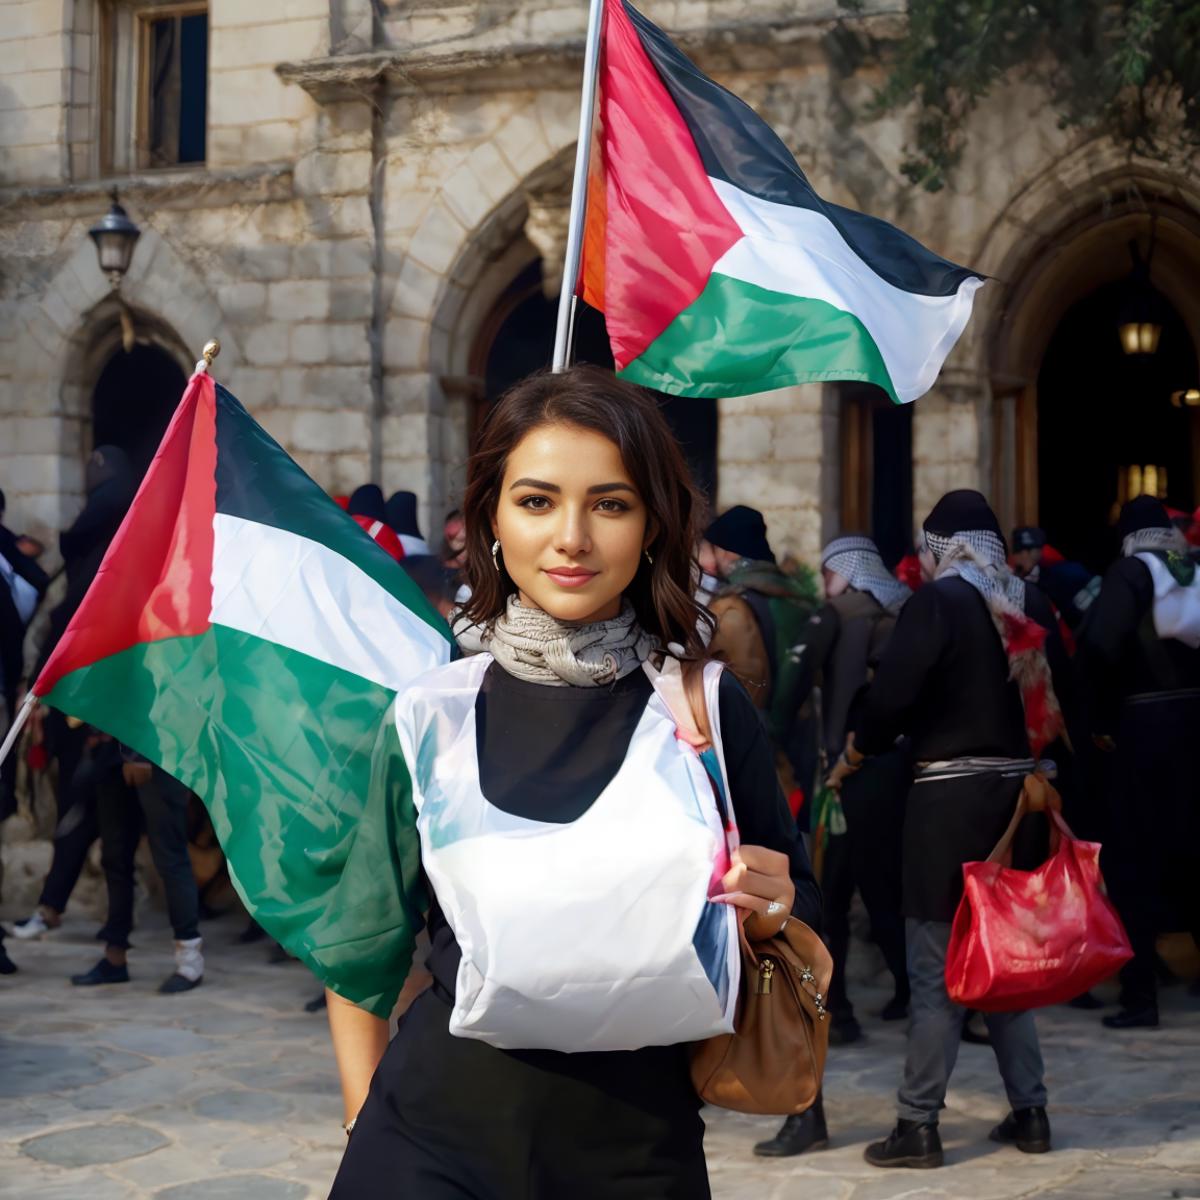 A beautiful young woman holding two Palestine flags while surrounded by others.